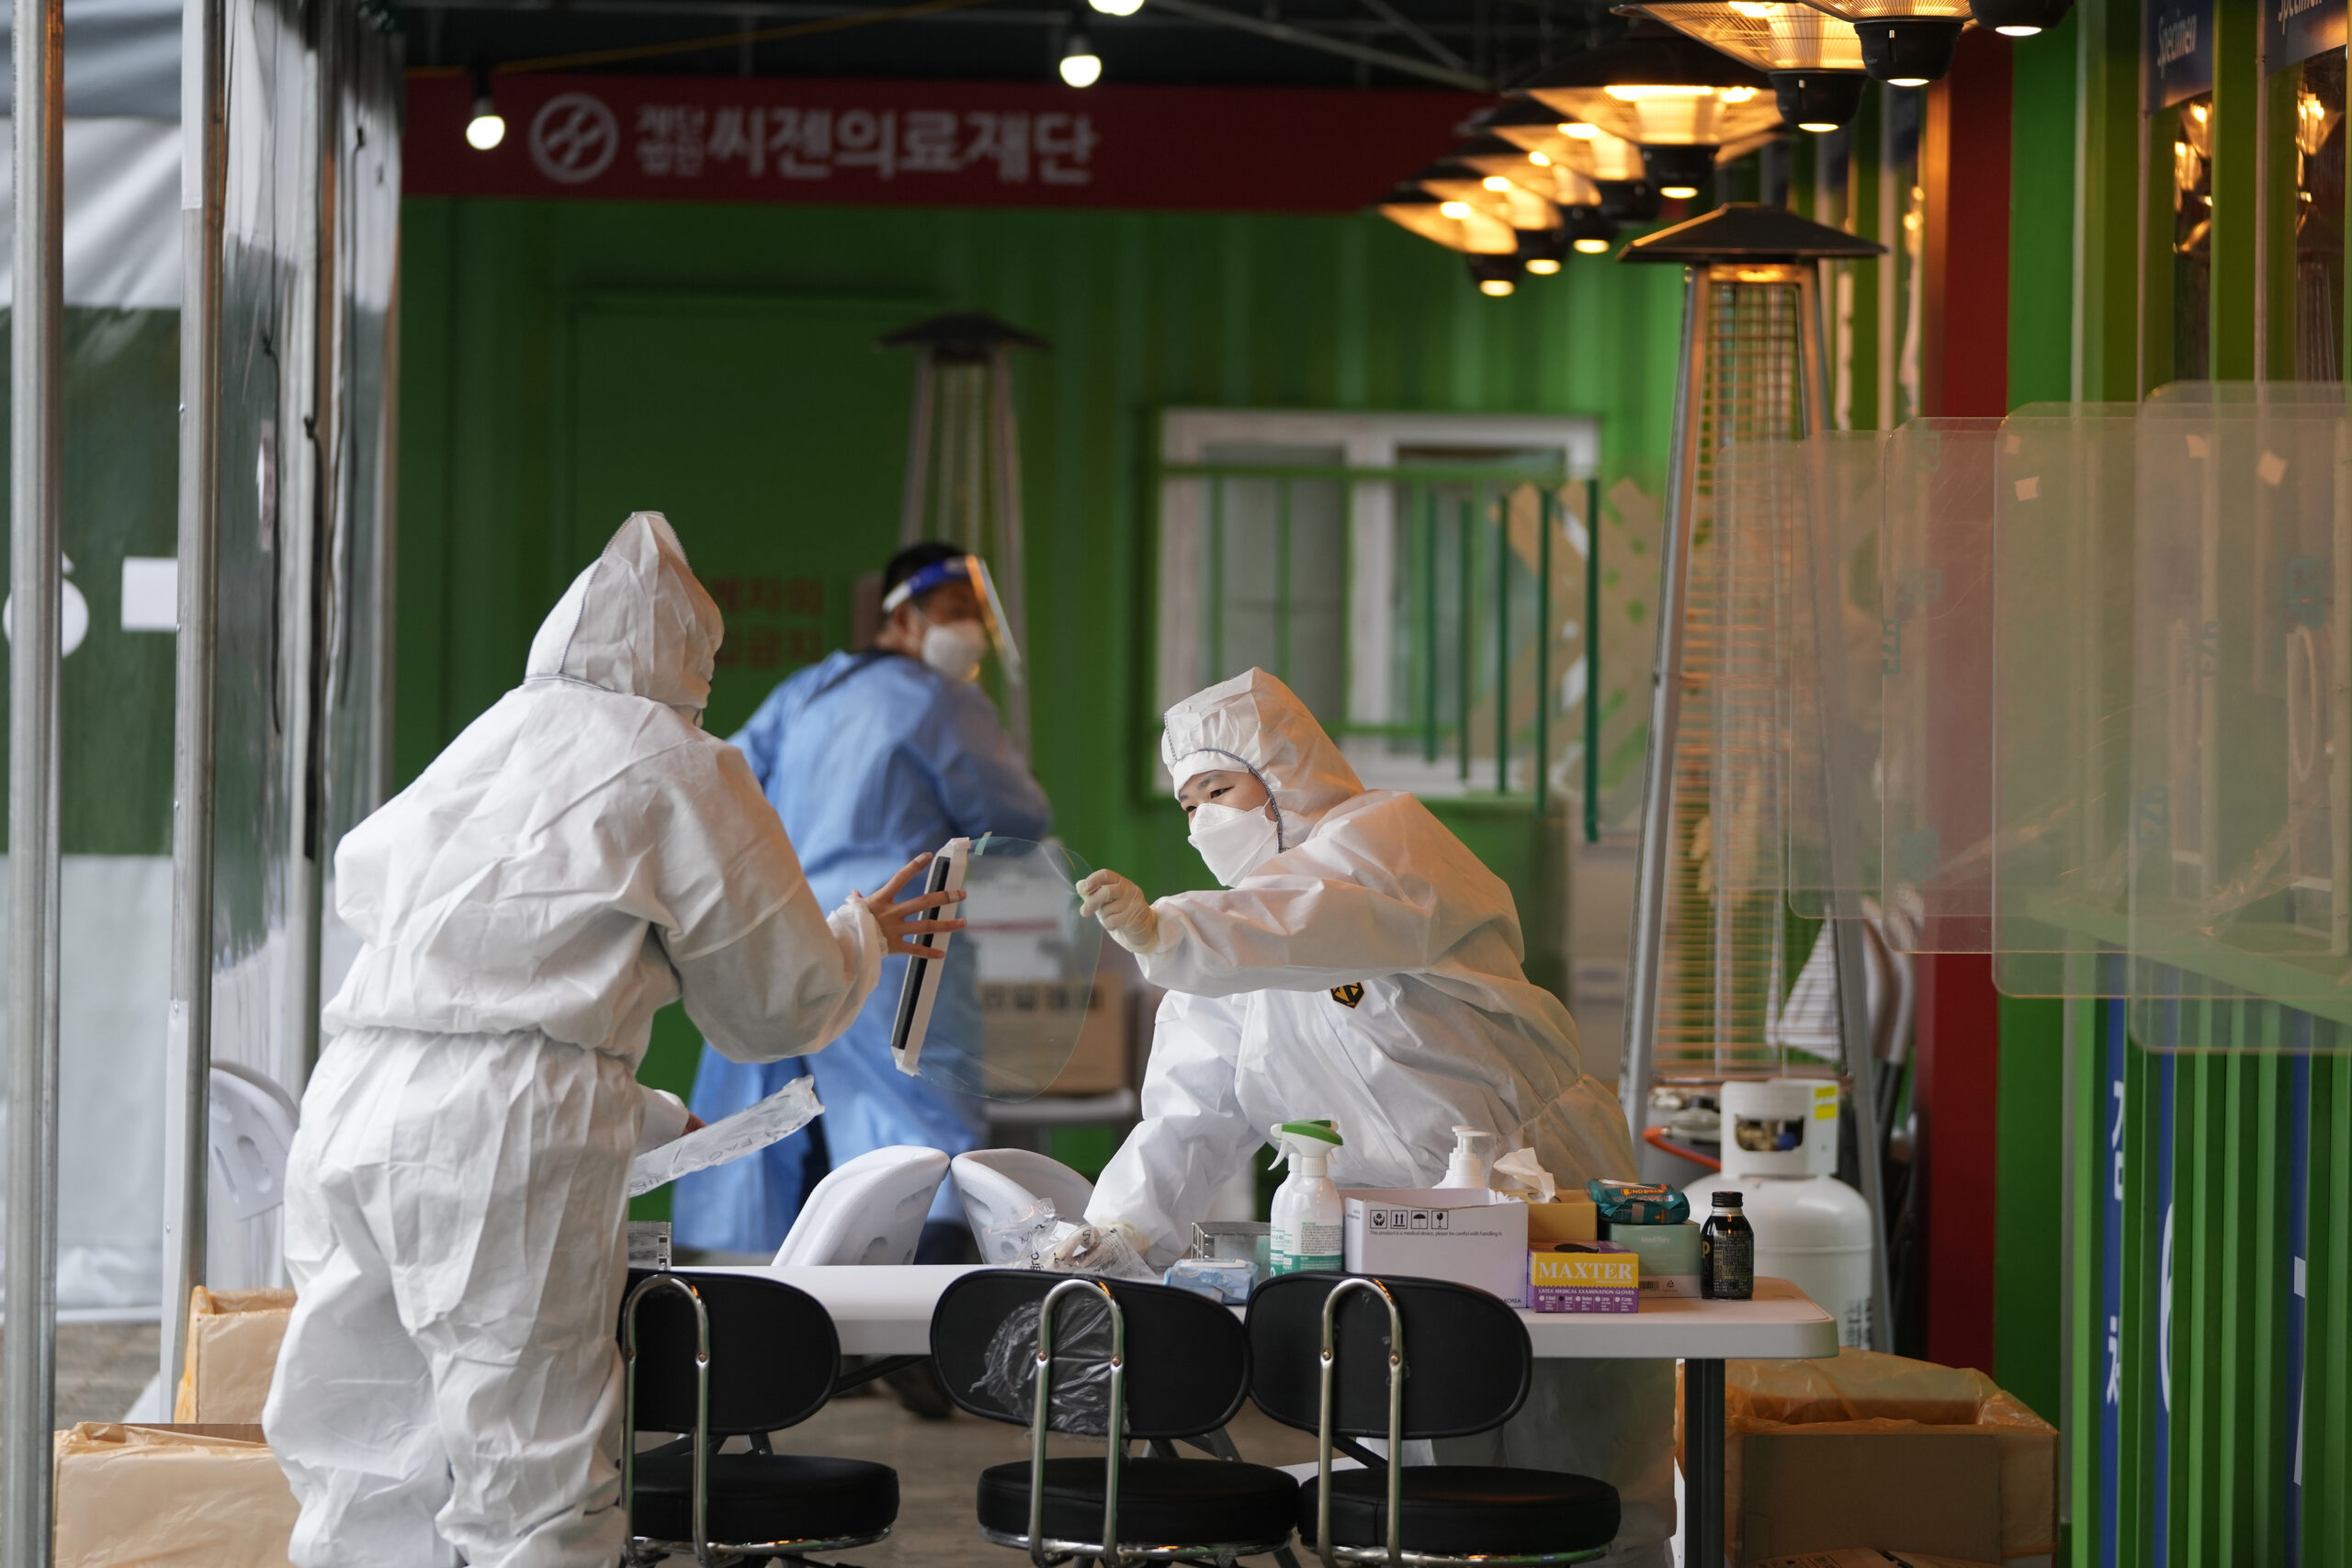 Medical workers wearing protective gear prepare to take samples at a temporary screening clinic for the coronavirus in Seoul, South Korea, Wednesday, Dec. 29, 2021. (AP Photo/Lee Jin-man)